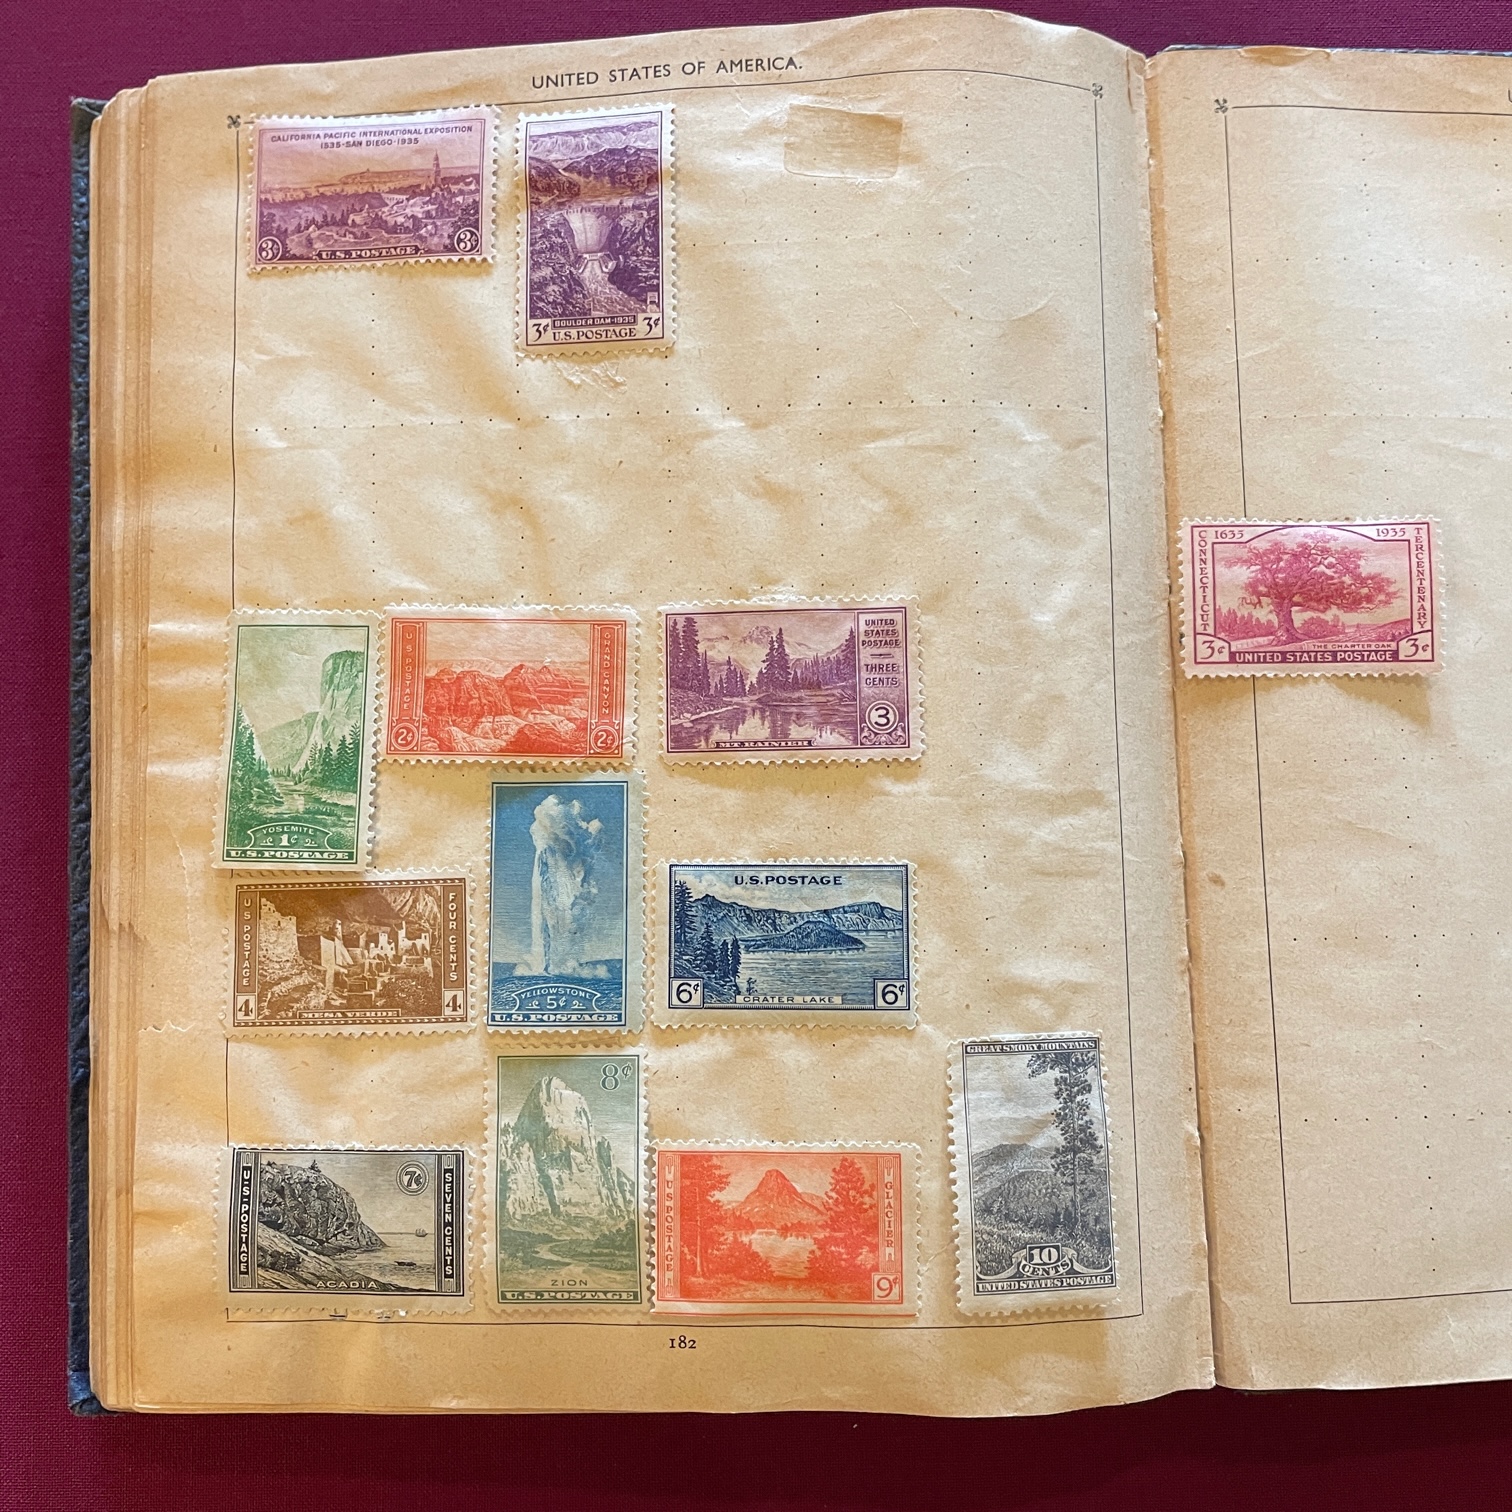 International Postage Stamp Album Junior Edition 1930 Over 500 Stamps !!  for Sale in San Diego, CA - OfferUp